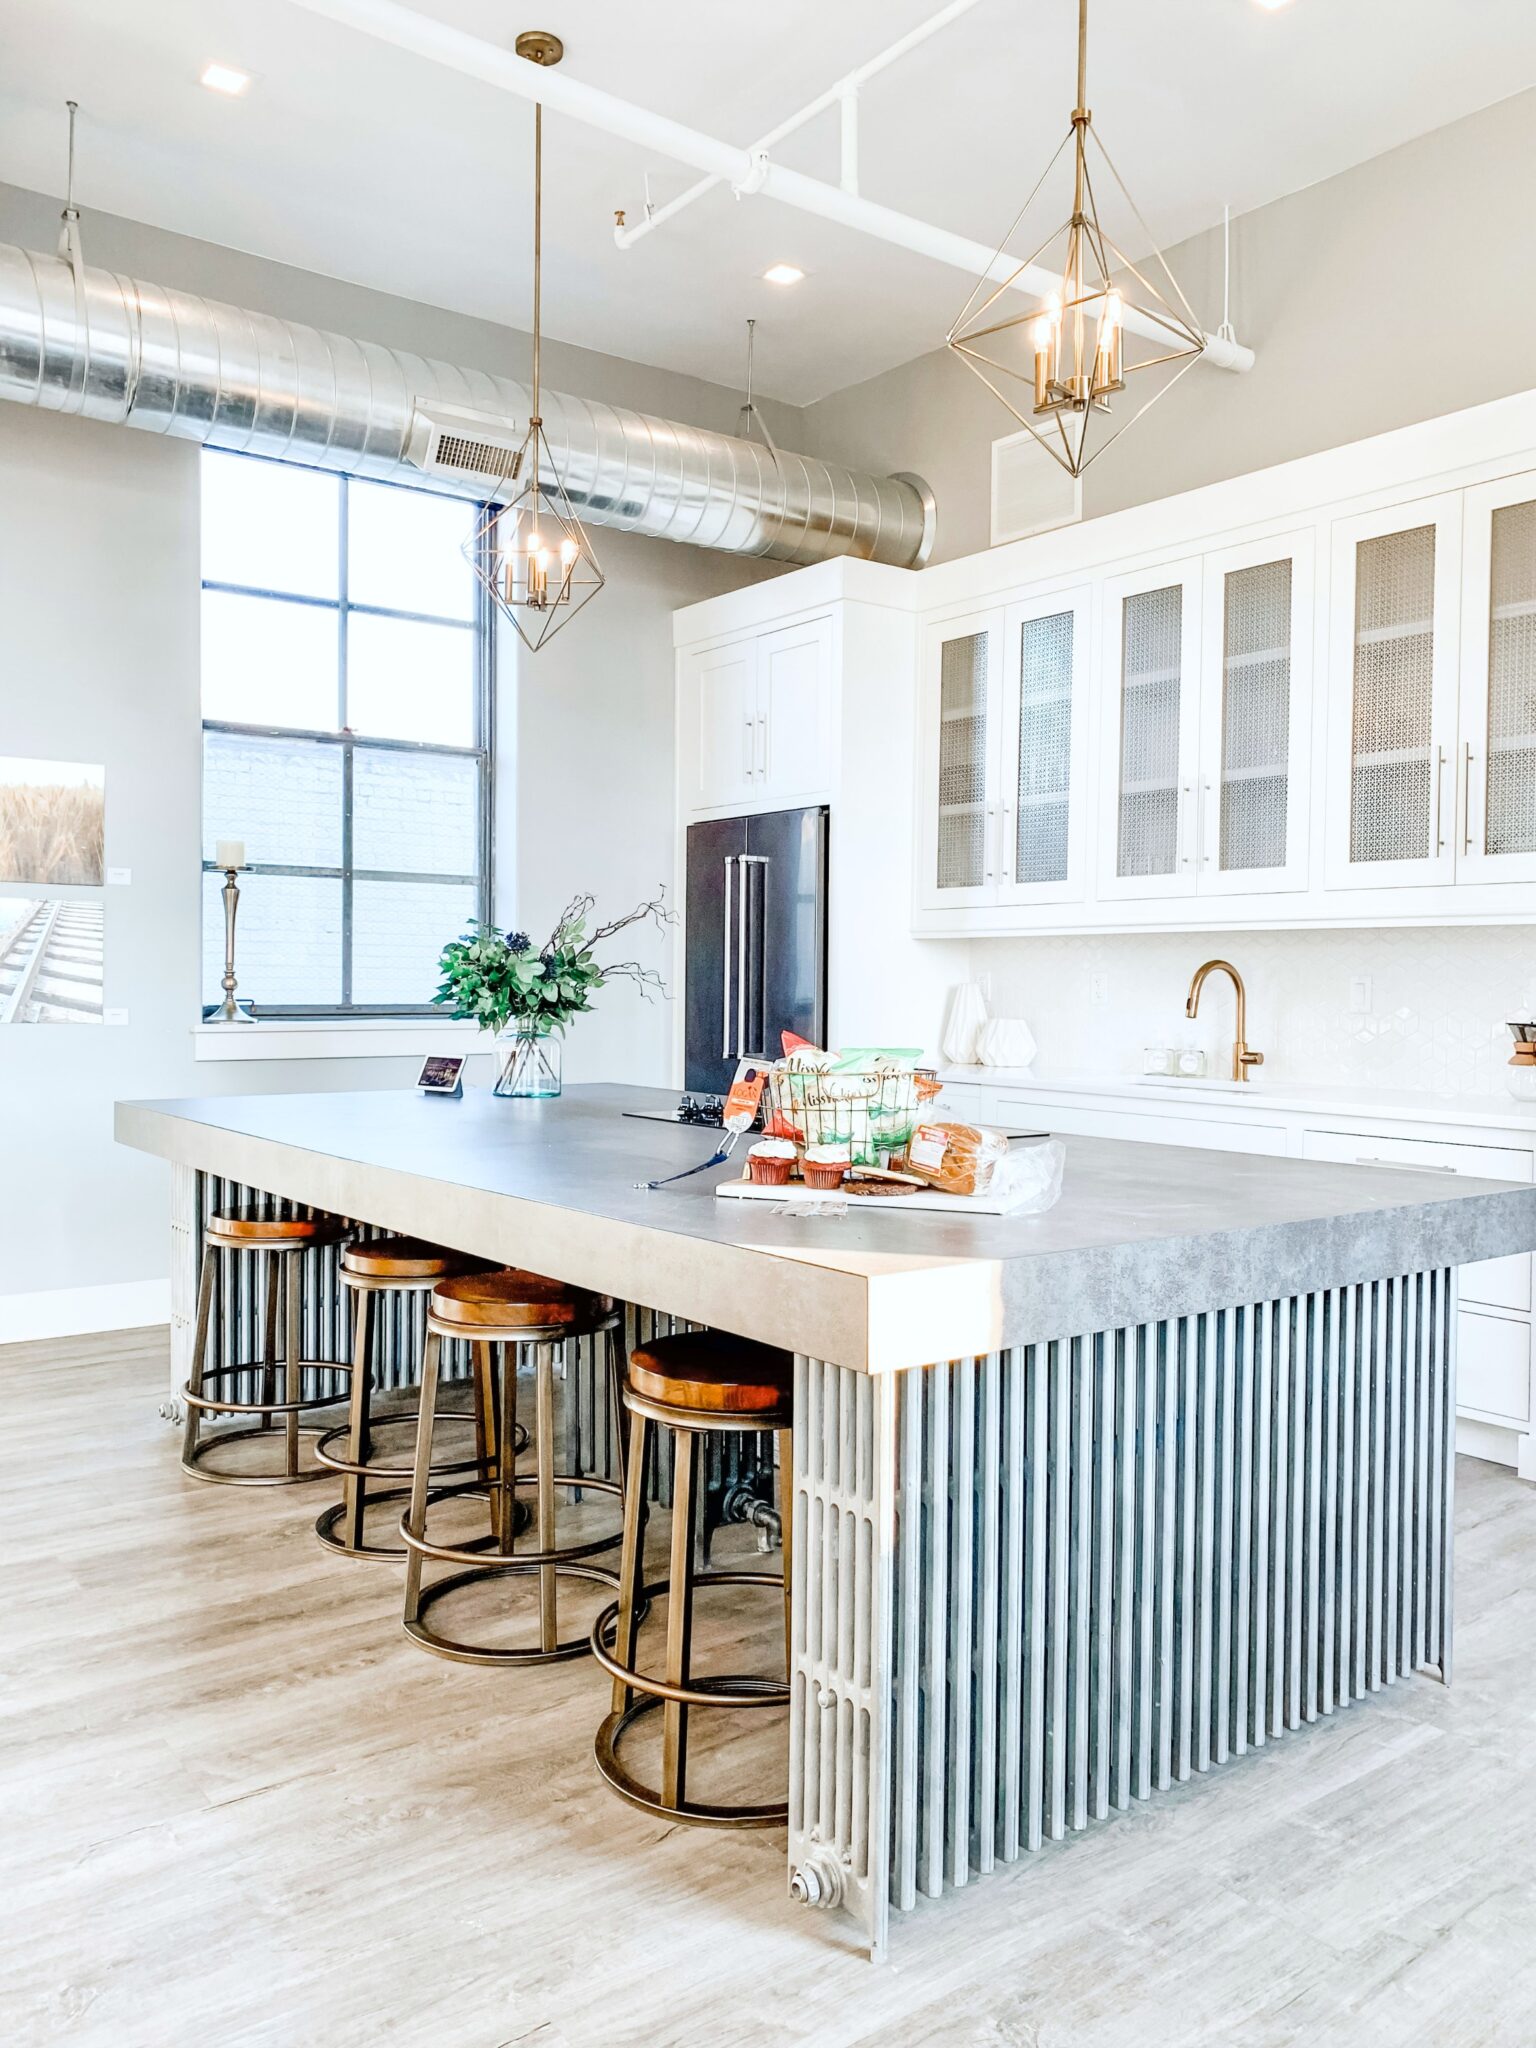 6 Questions You Should Ask Before You Start a Kitchen Remodeling Project